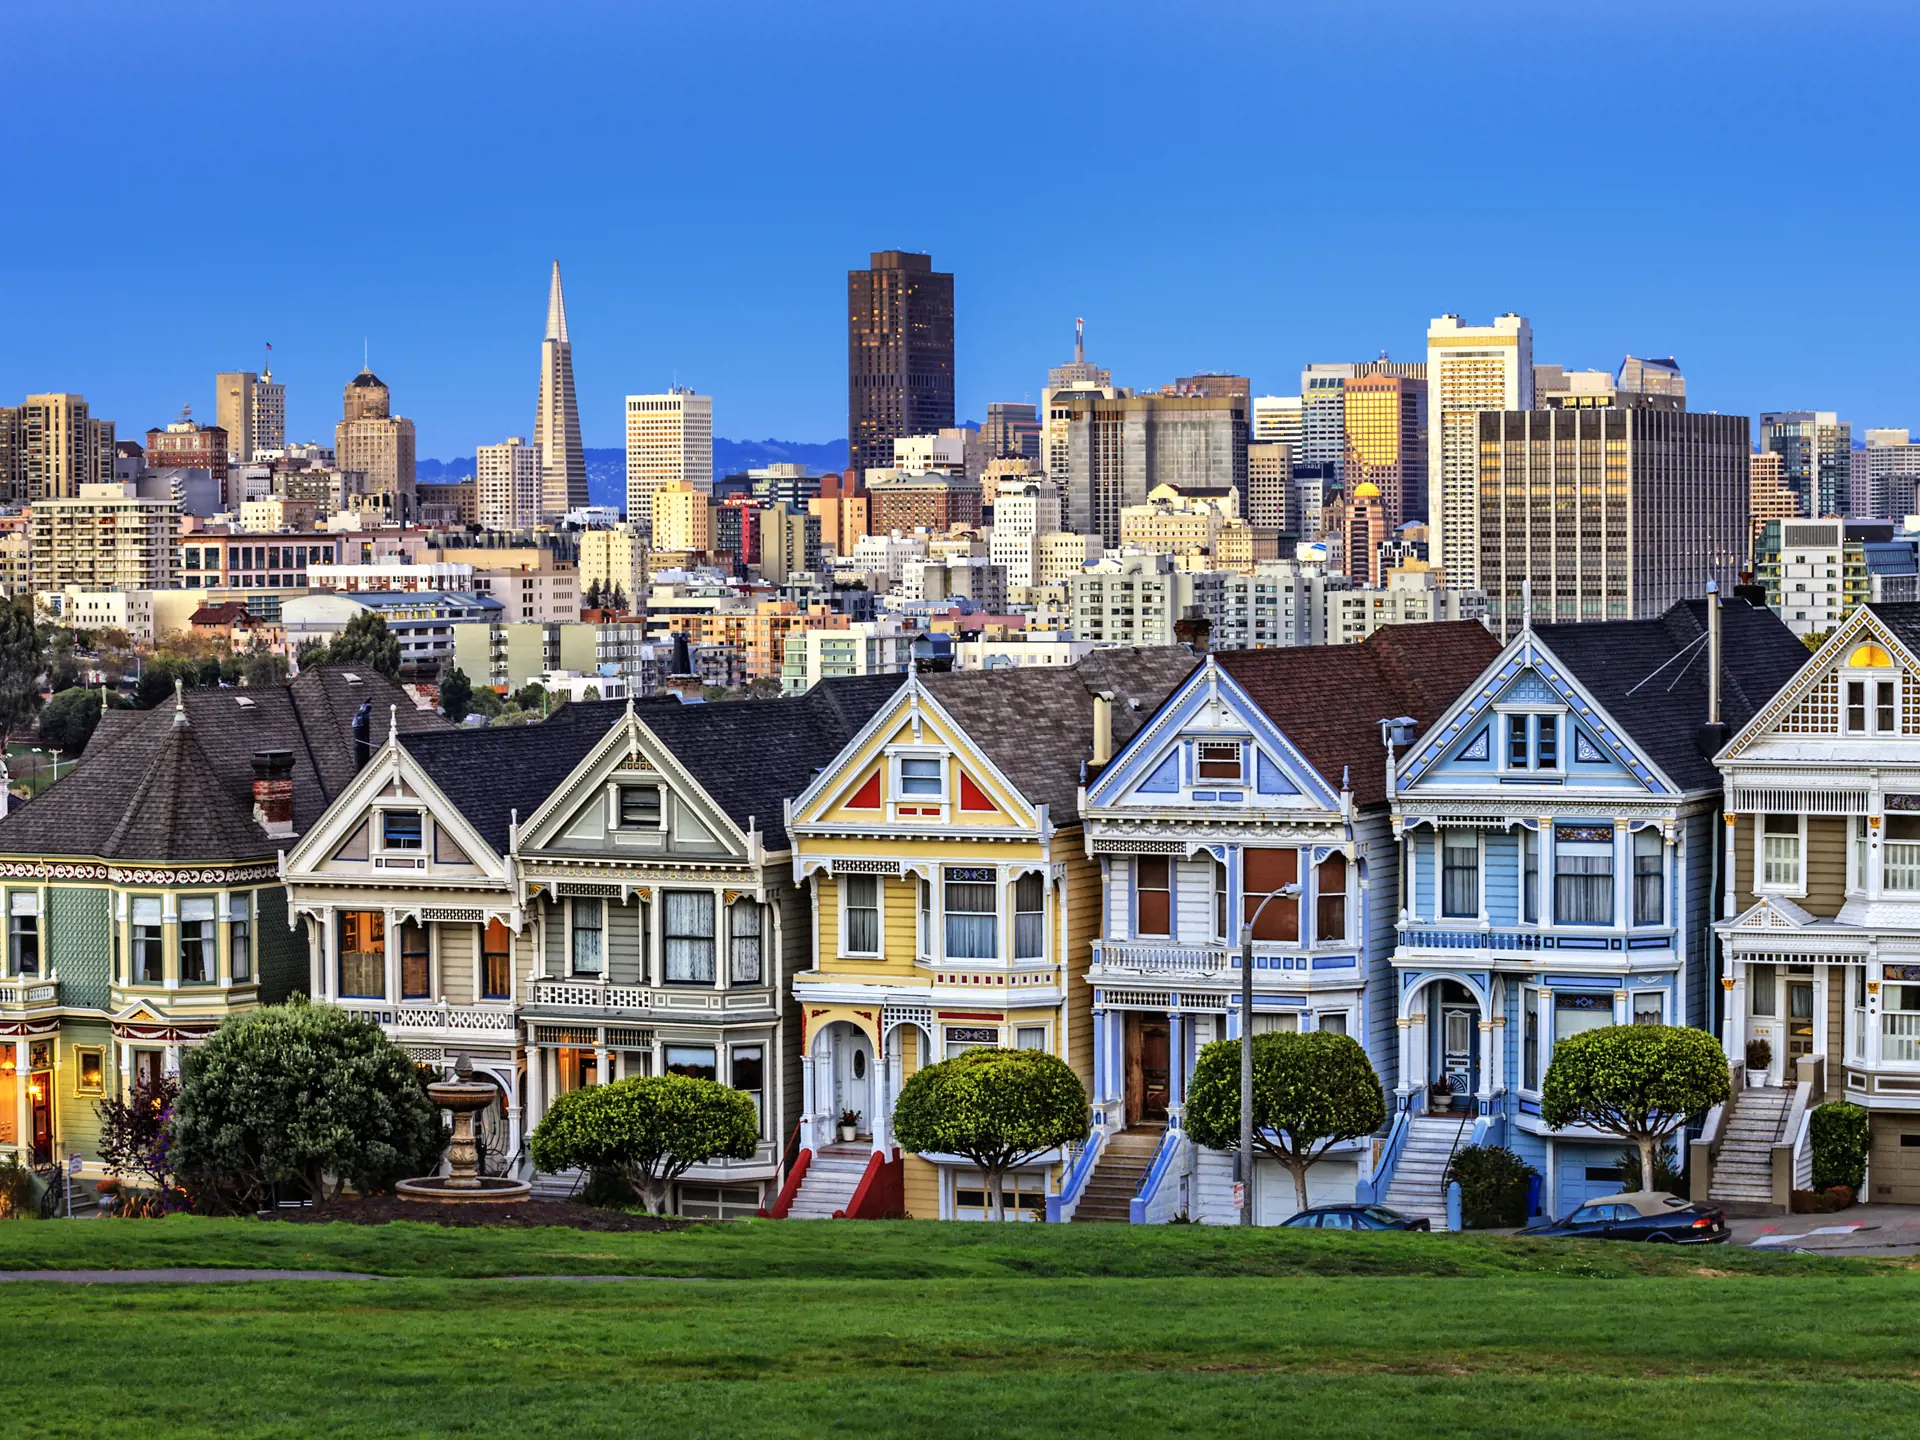 shutterstock_141108409 View from Alamo Square at twilight, San Francisco..jpg